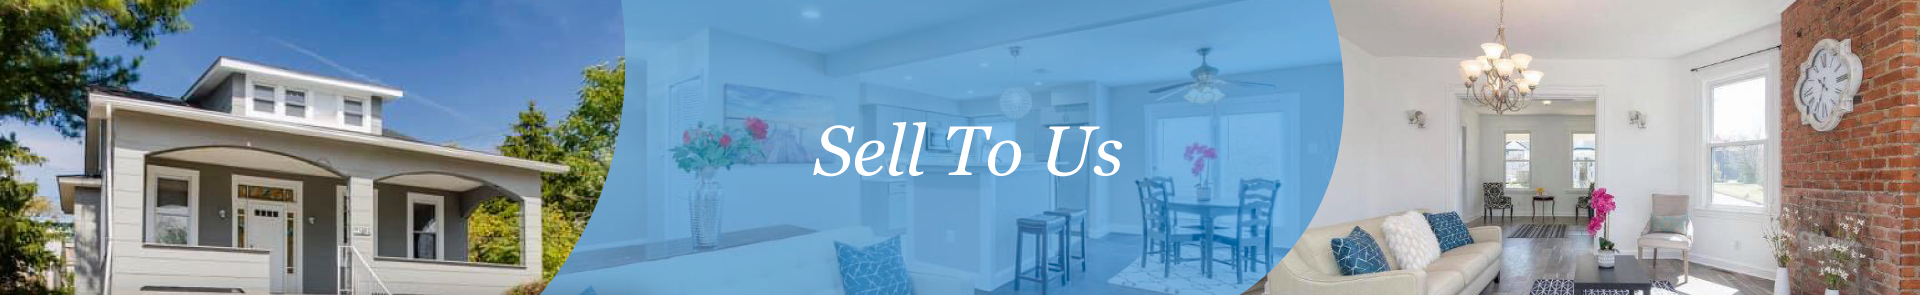 Why Sell To Us - LA Property Partners